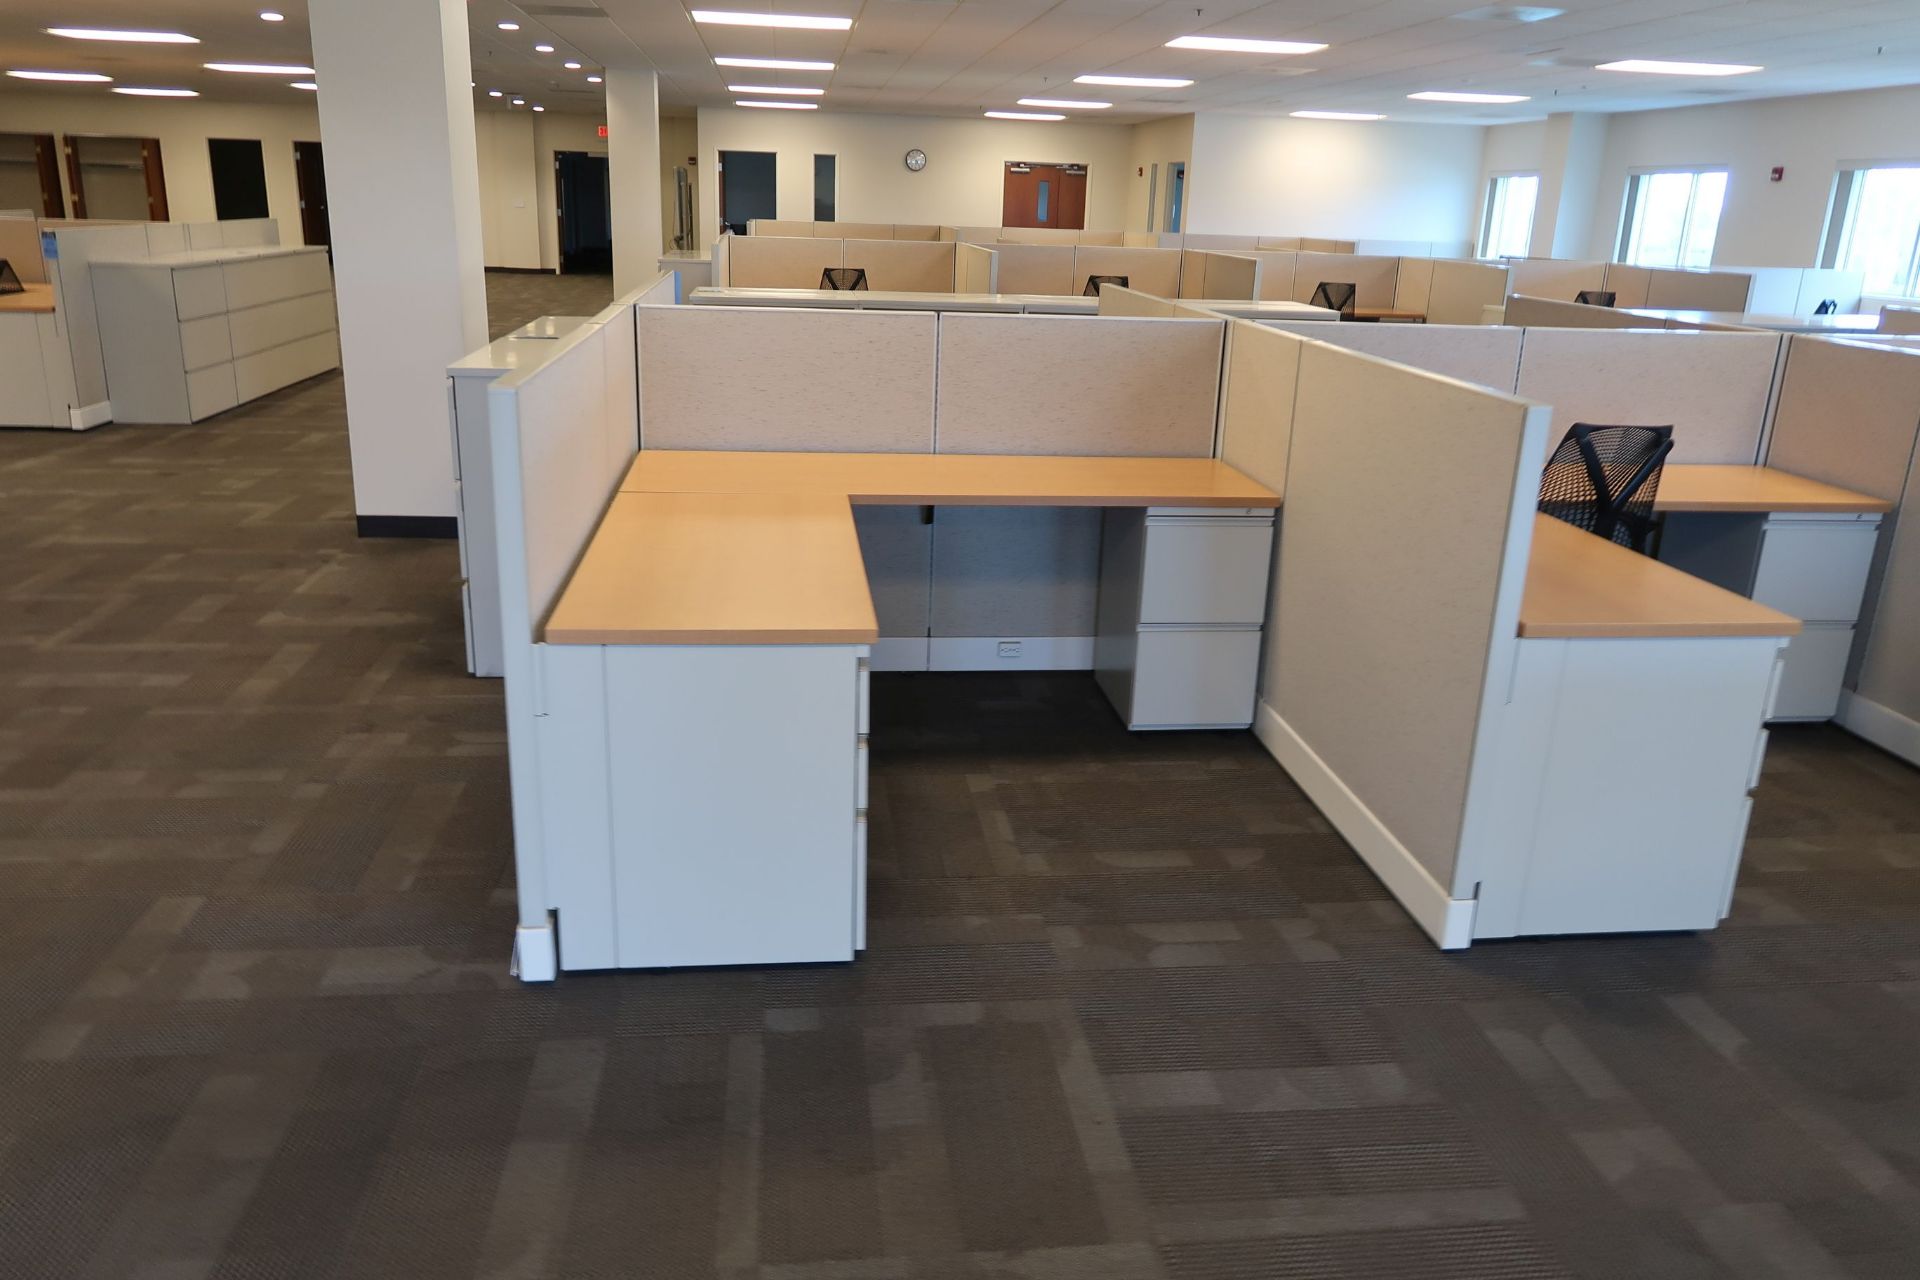 (LOT) 10-PERSON HERMAN MILLER CUBICLE SET 47" HIGH WALLS WITH CHAIRS - Image 7 of 11